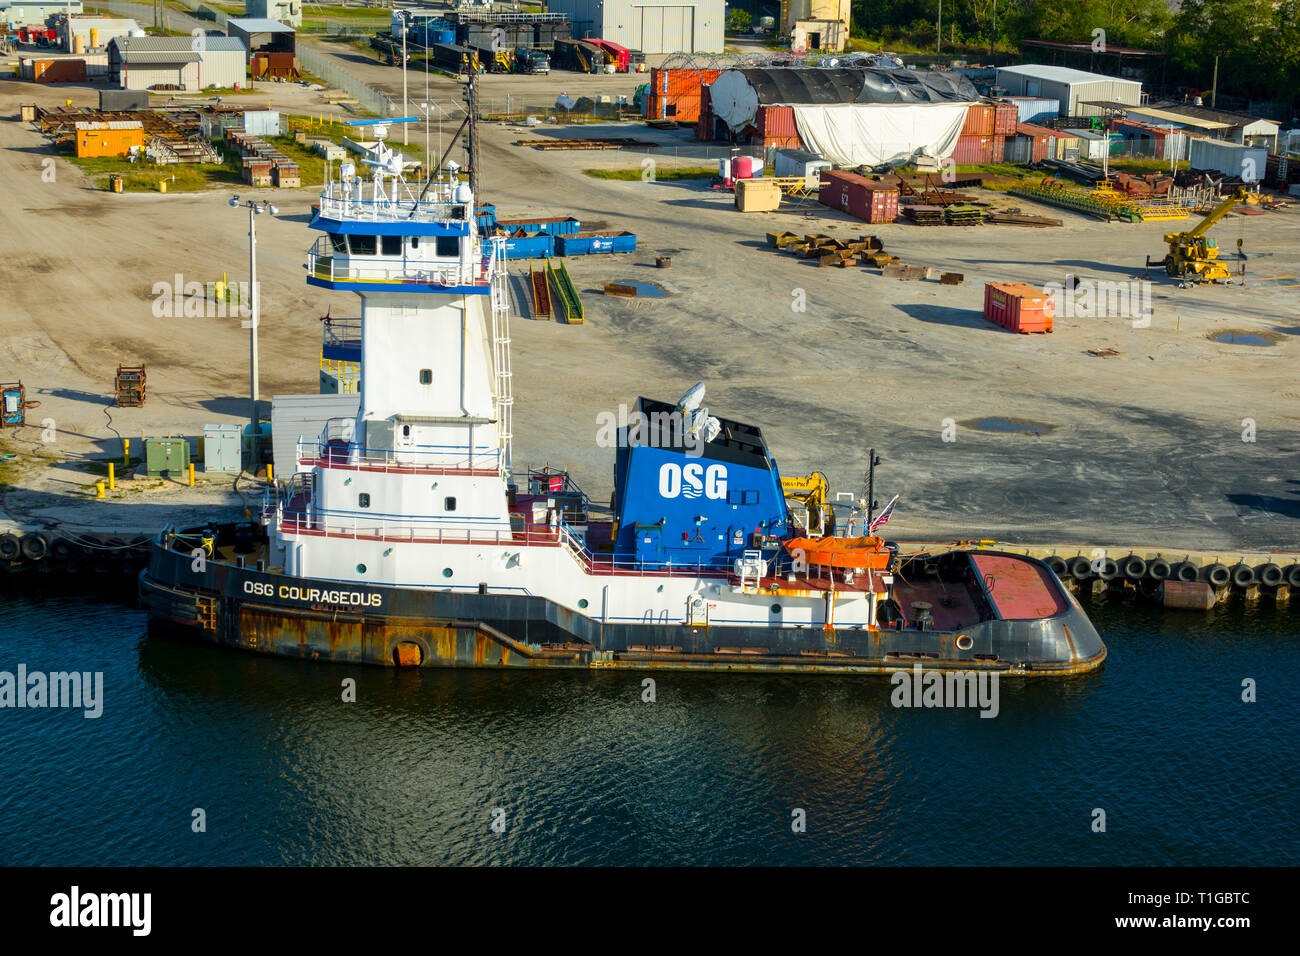 Vessel OSG COURAGEOUS (IMO: 9395707, MMSI: 367481310) is a Pusher Tug built in 2011 and currently sailing under the flag of United States of America b Stock Photo